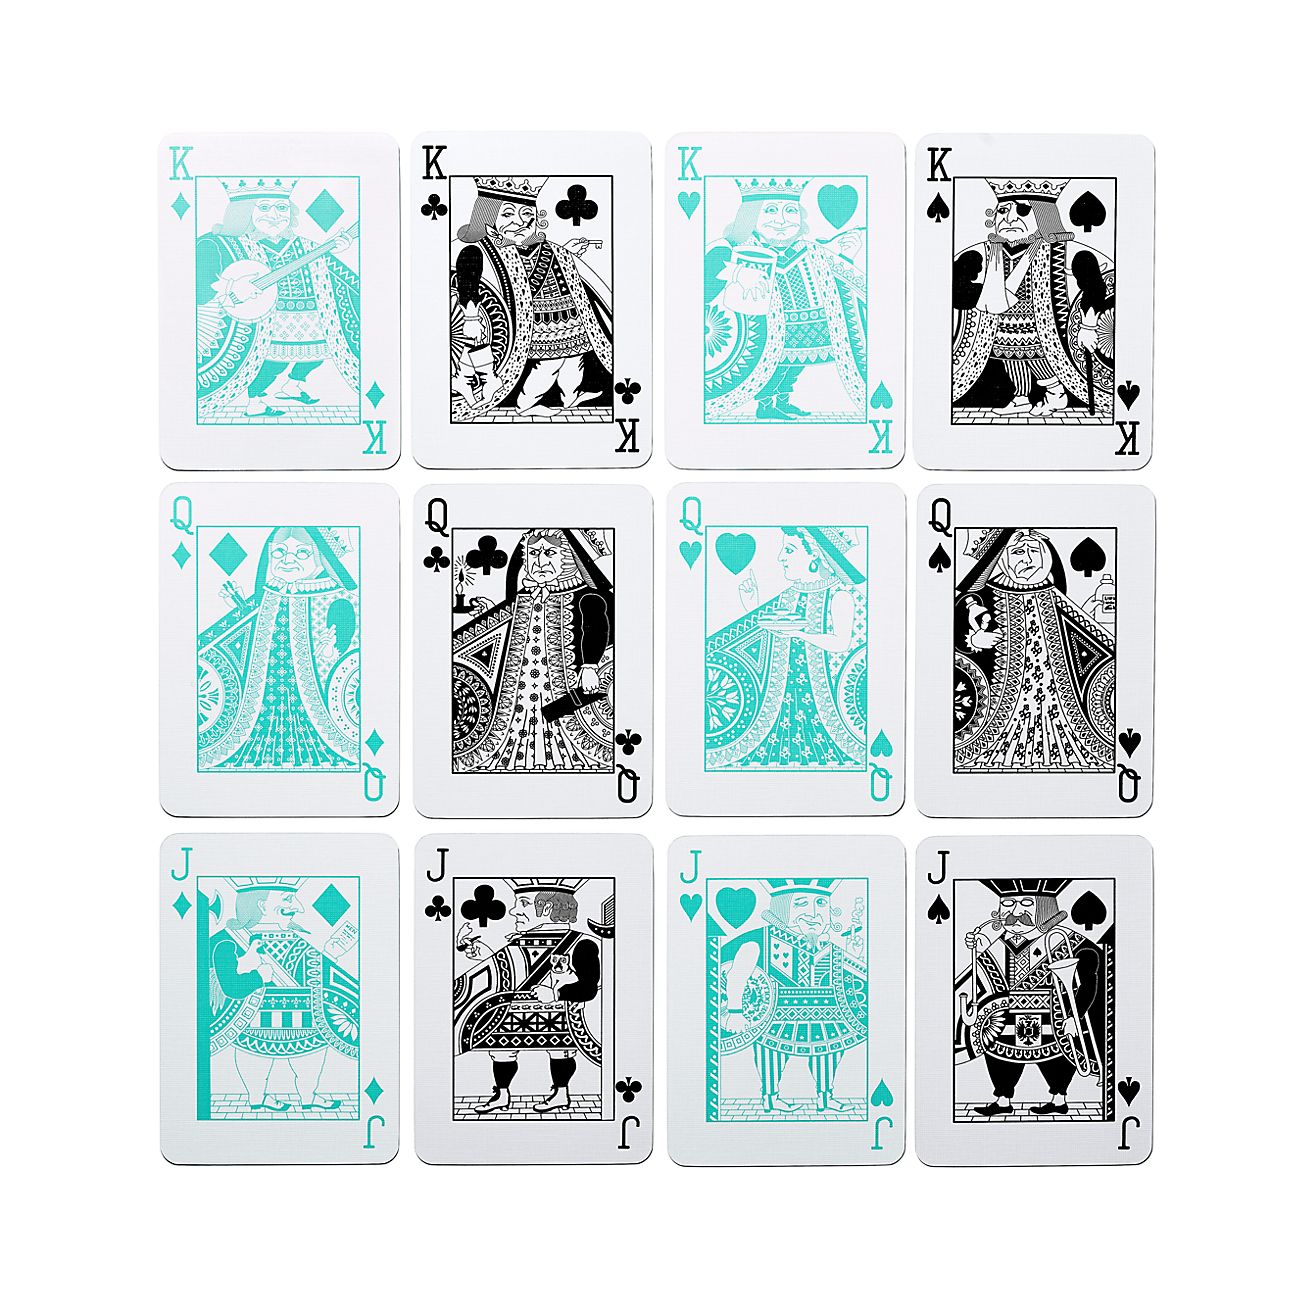 tiffany and co playing cards